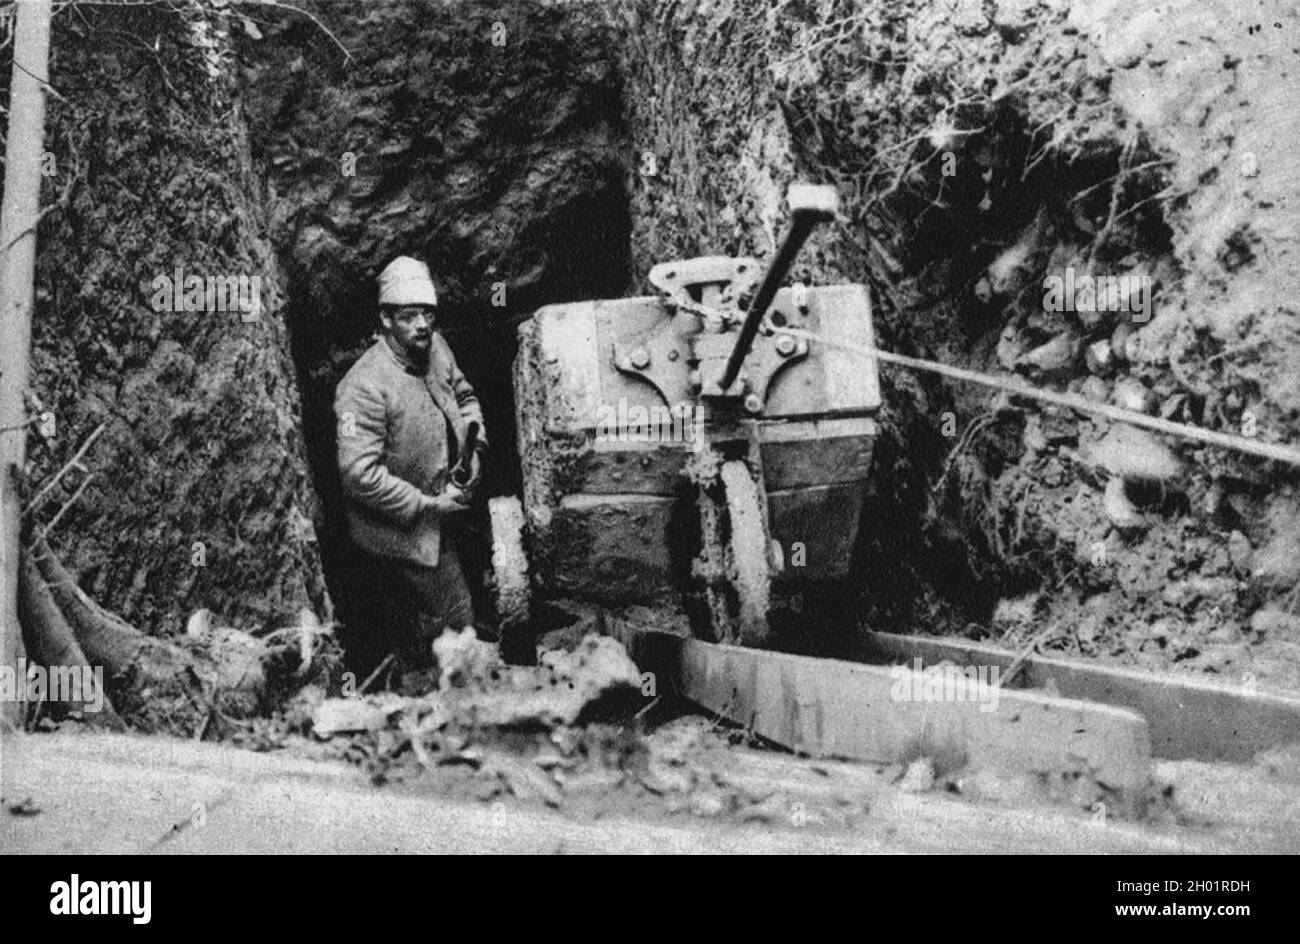 Sappers digging a tunnel under the German lines on the Vosges front. The sappers worked at a depth of about 17 meters. When they reached a spot below enemy positions explosives were placed and later detonated, destroying anything above. Stock Photo